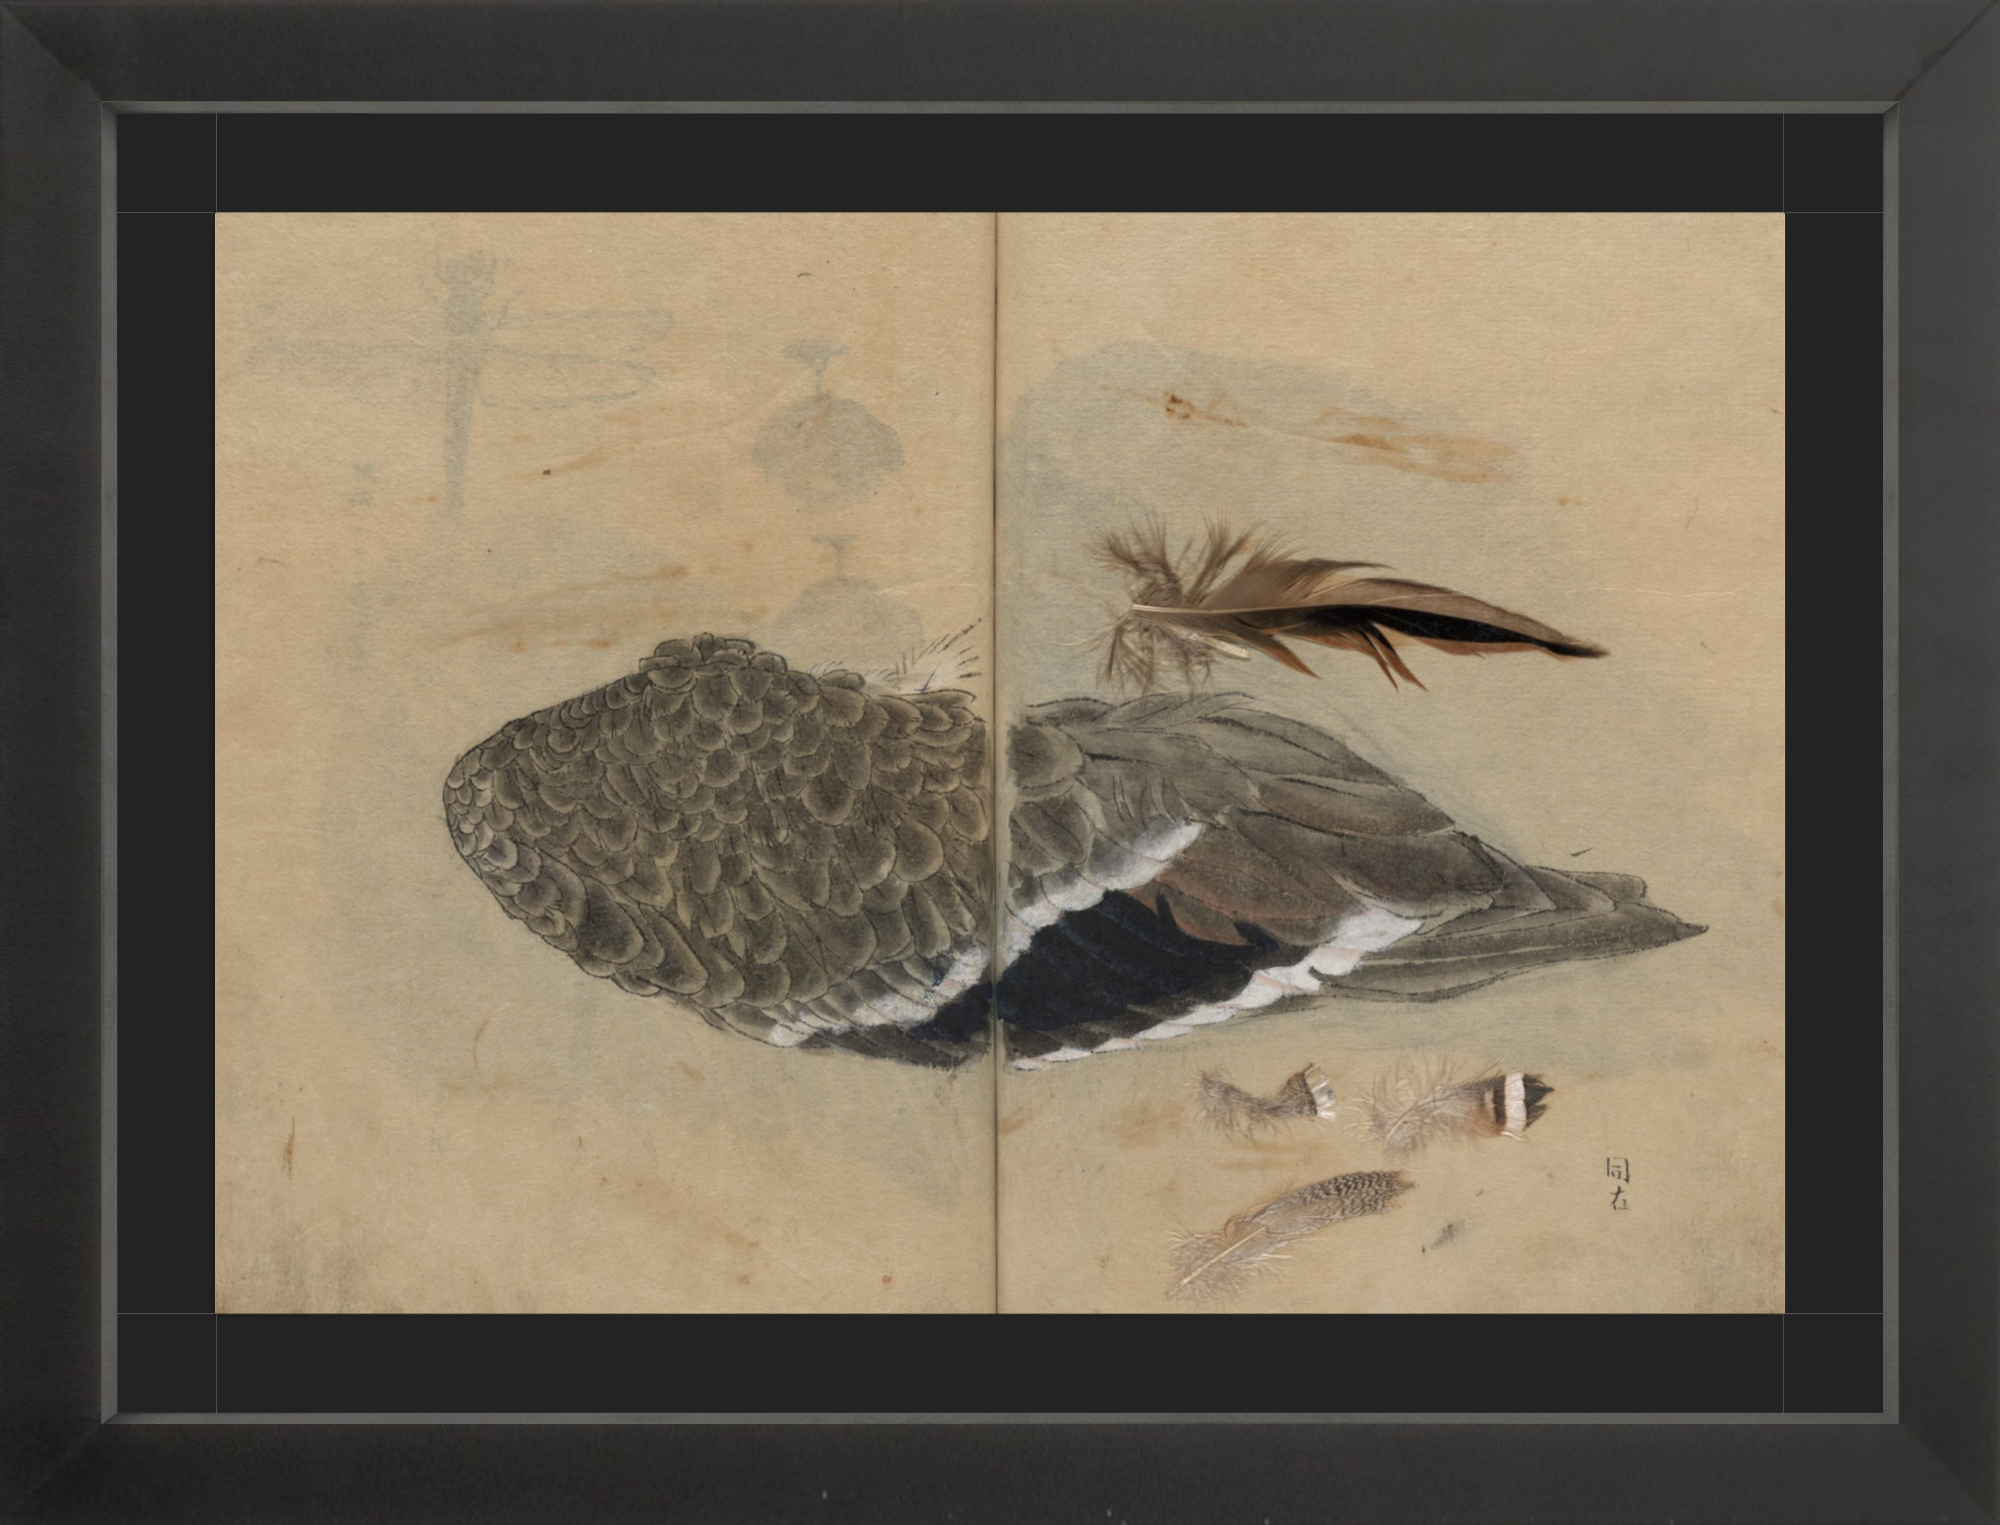 Framed Nature Studies from a 19th Century Sketchbook